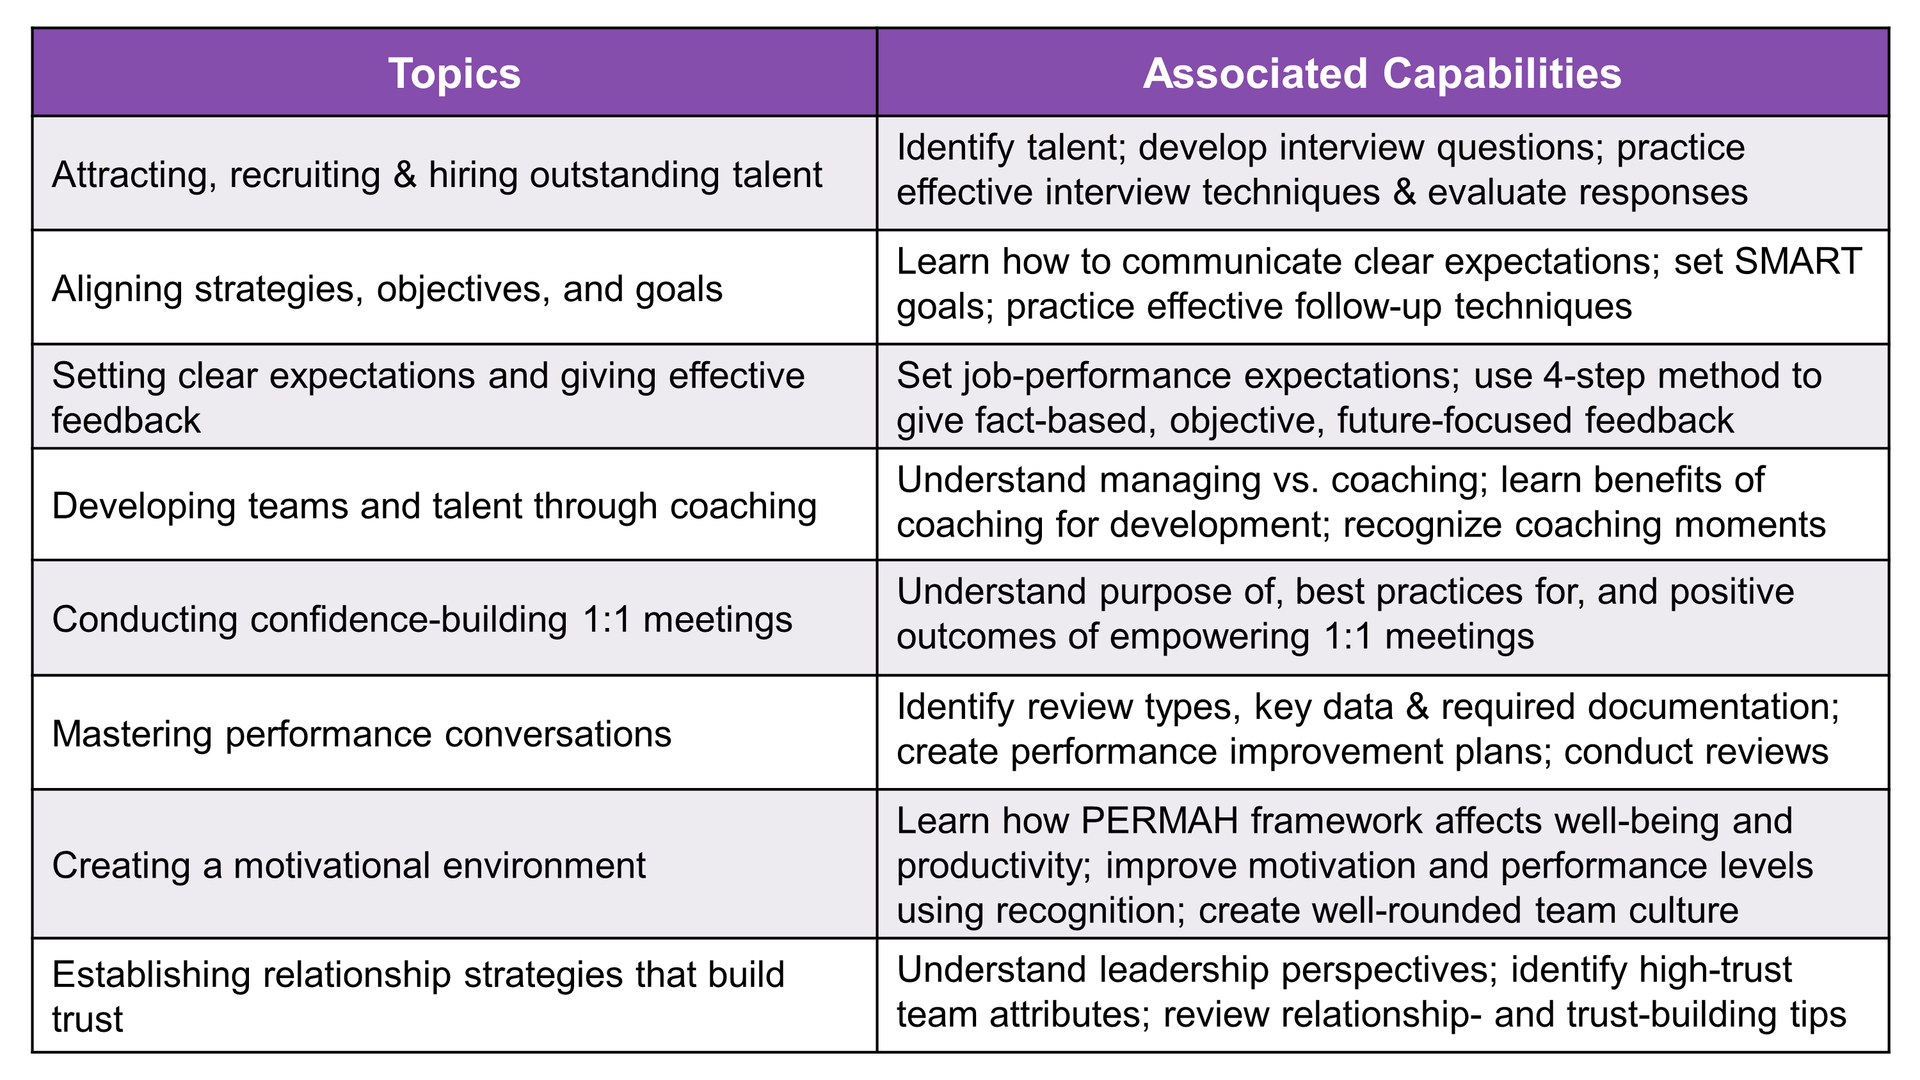 Available training topics  and associated capabilities table: attracting, recruiting & hiring talent; aligning strategies, objectives & goals; setting expectations & giving effective feedback; developing teams through coaching; conducing one-on-one meetings; mastering performance conversations; creating motivational environment; building high-trust teams.